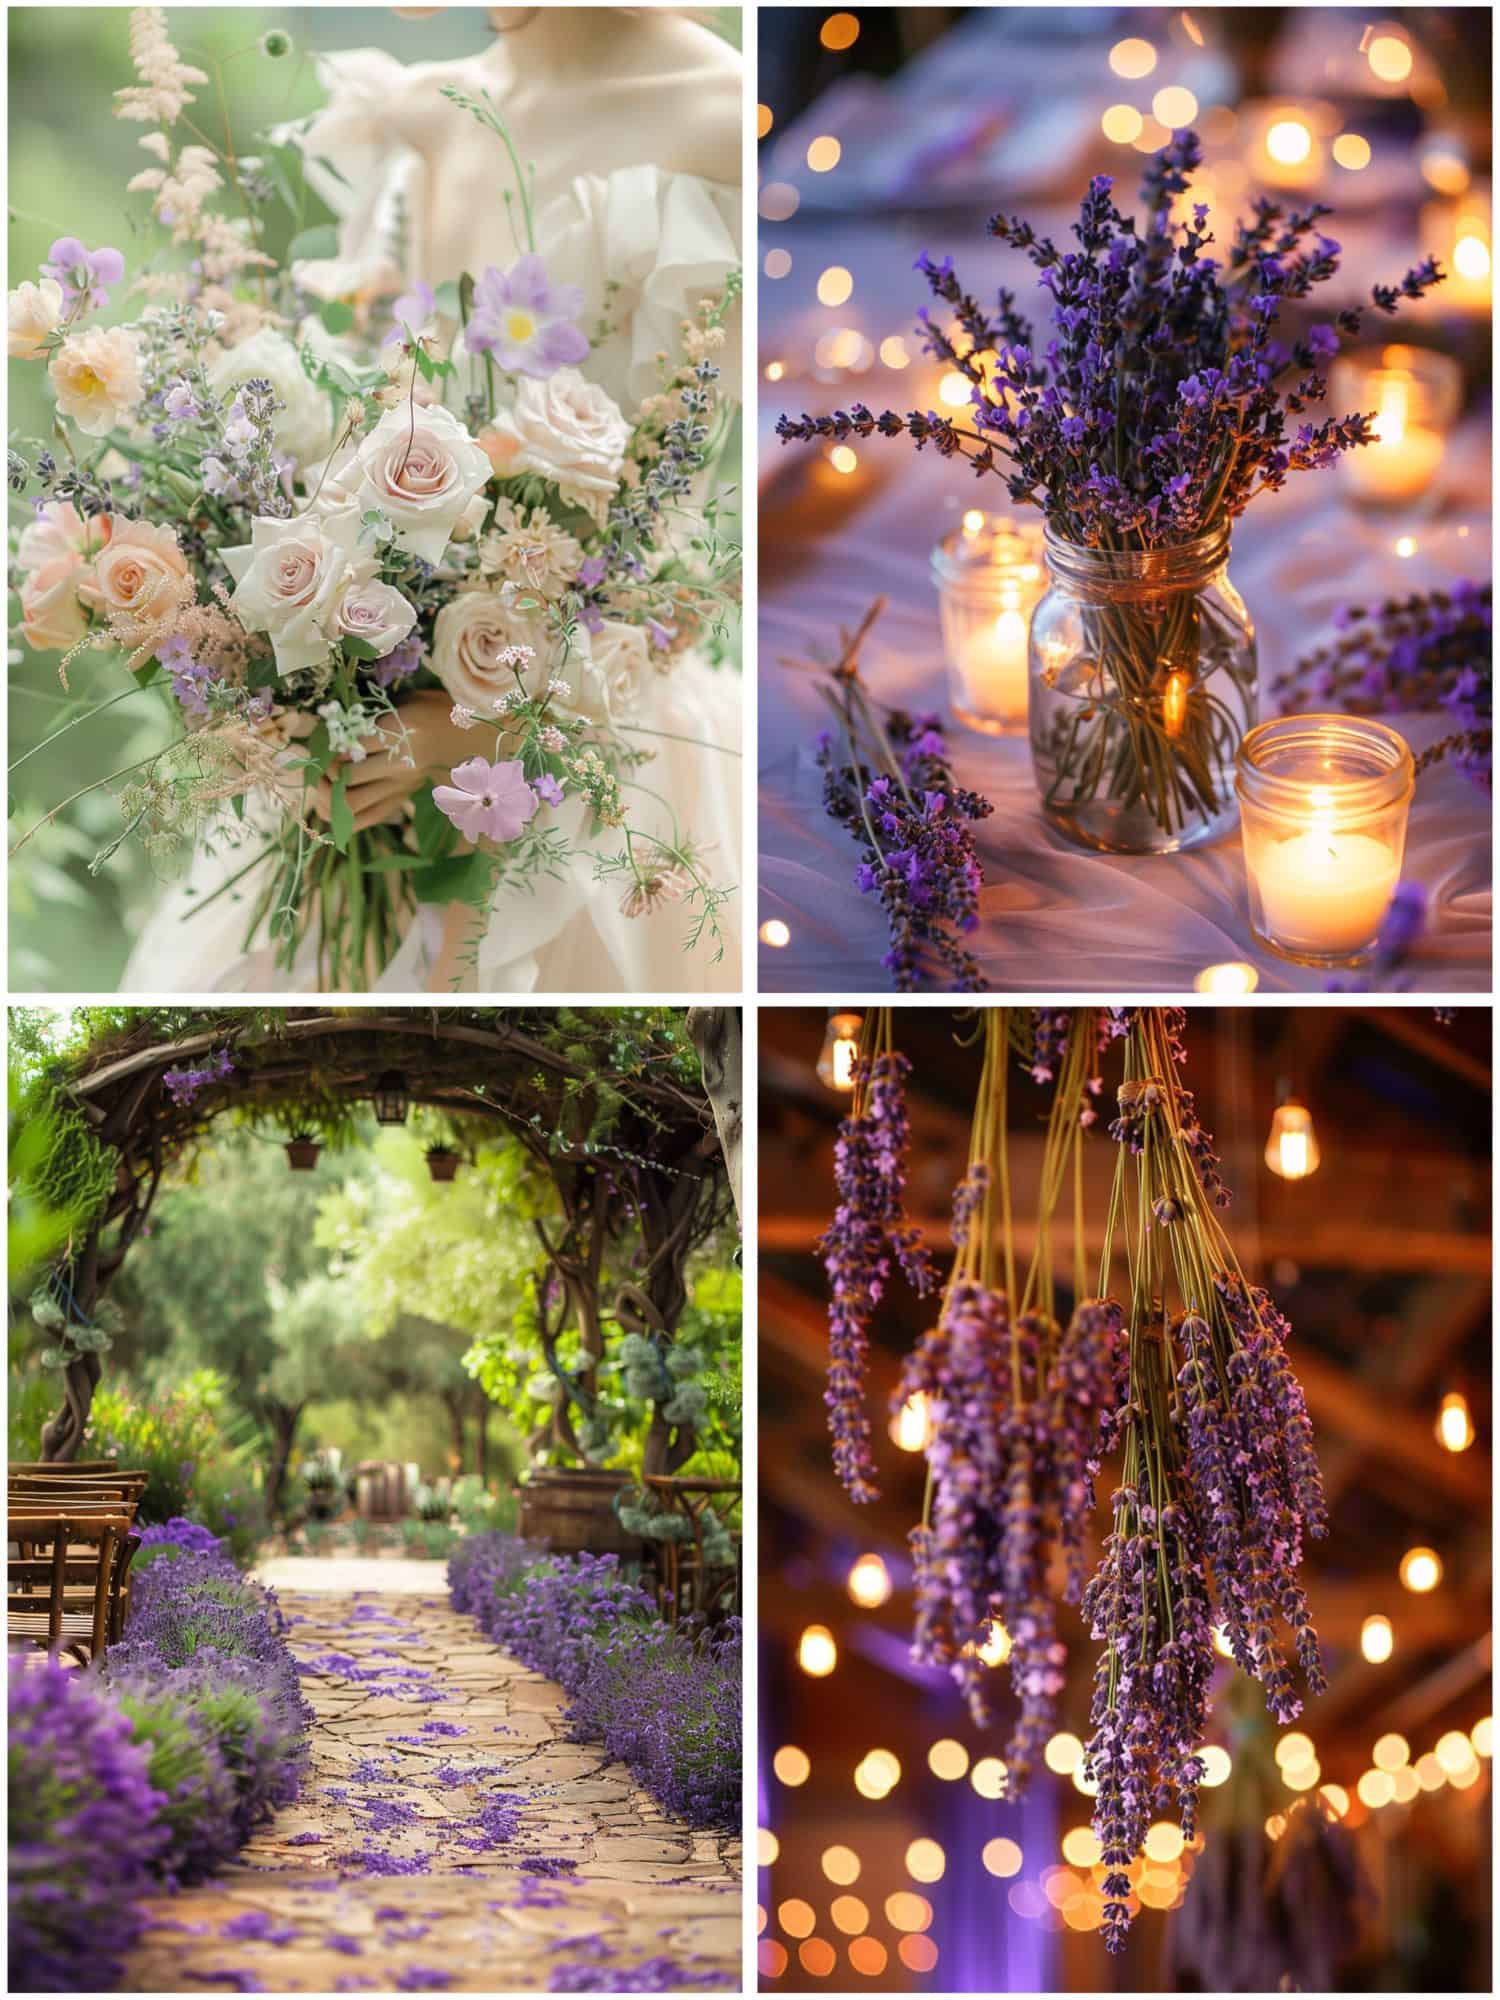 lavenders incorporated into decor and bouquets